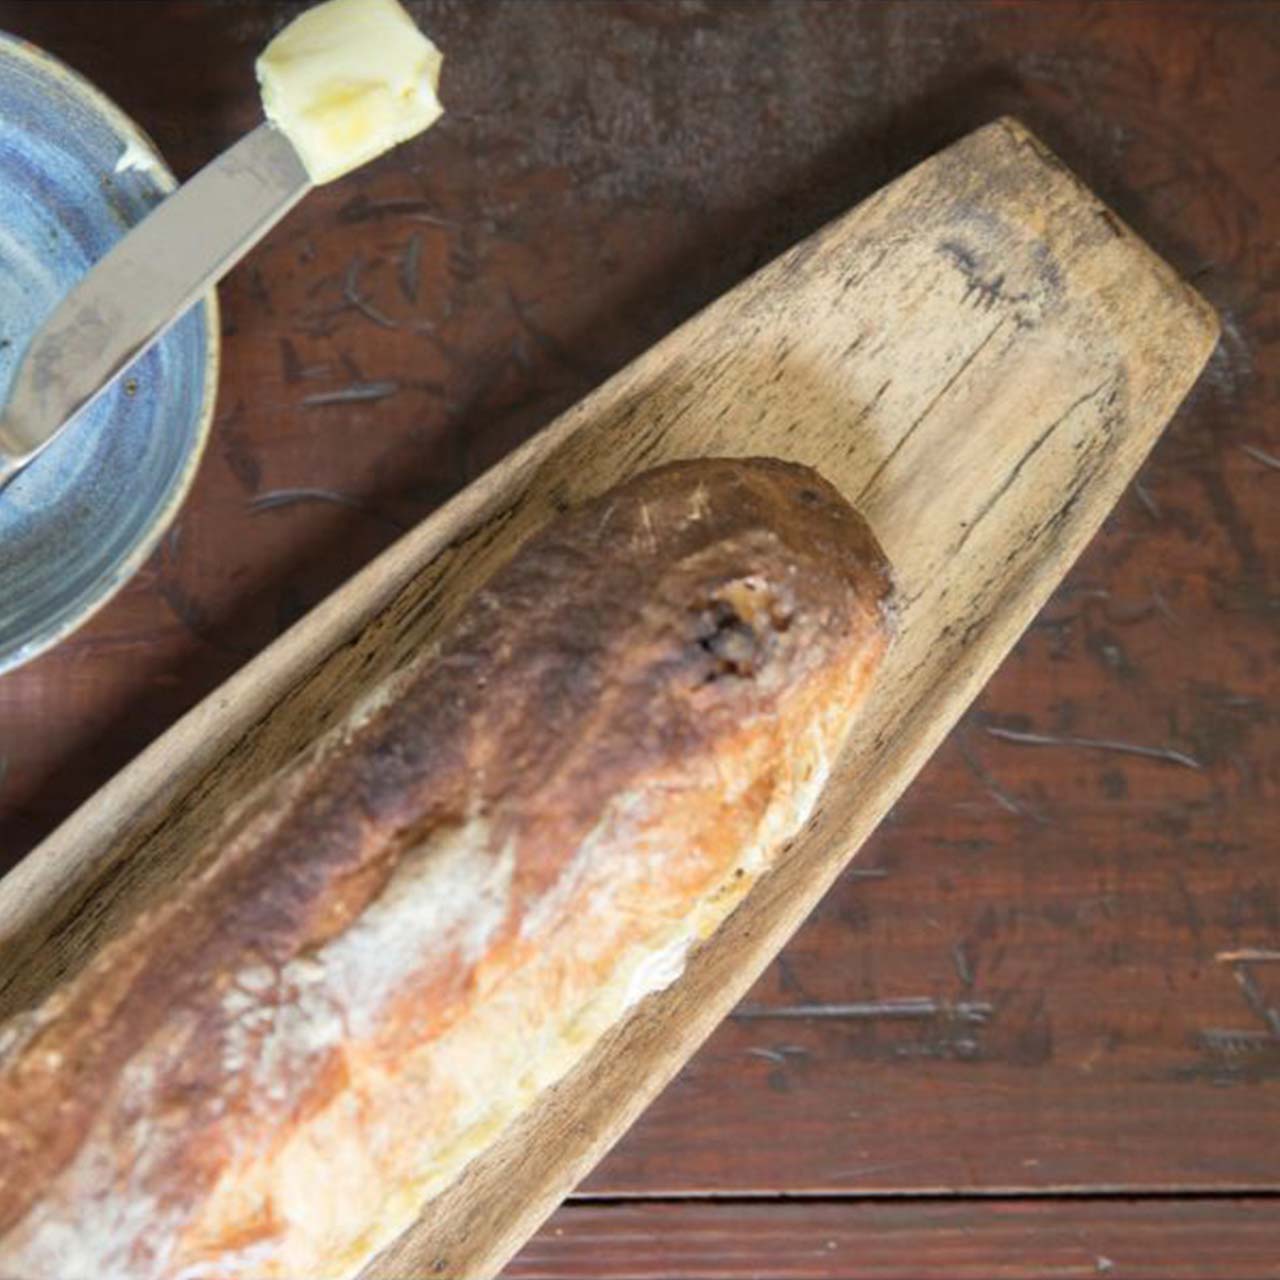 Hand-Crafted French Bread Board